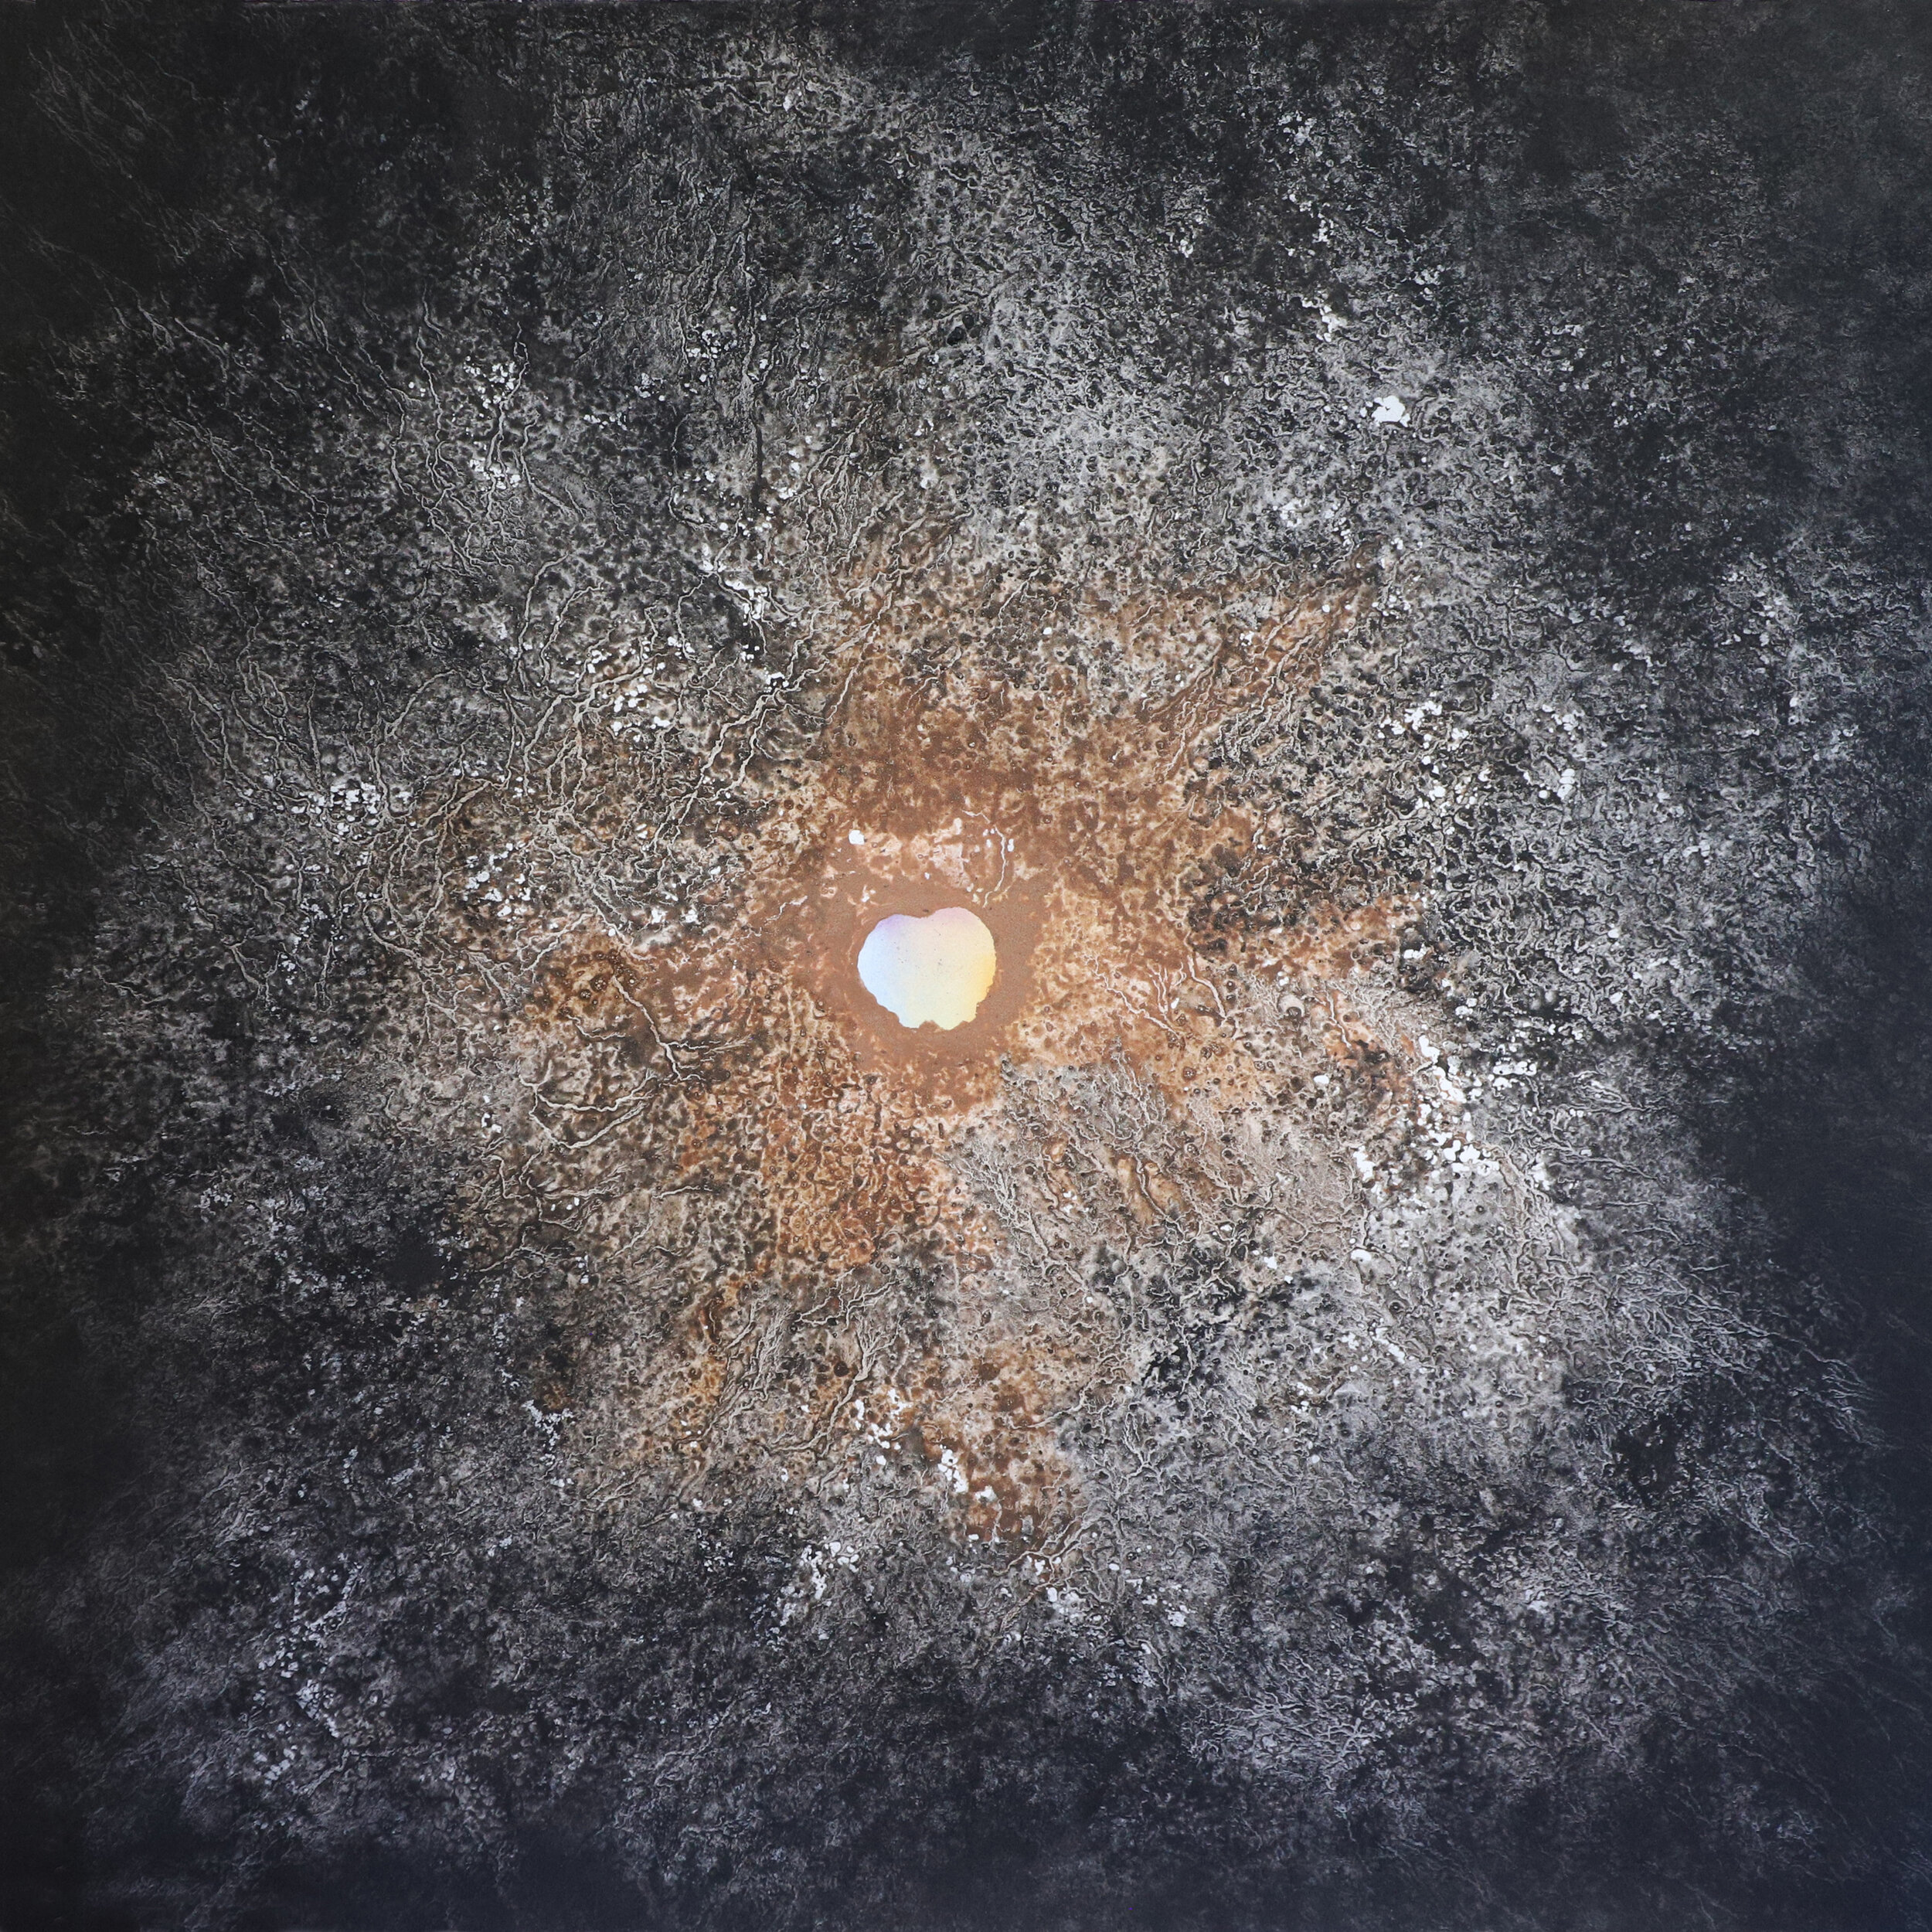    Planet 4   mixed media on paper with soil and minerals from the Atacama Desert, 38 x 38 inches 